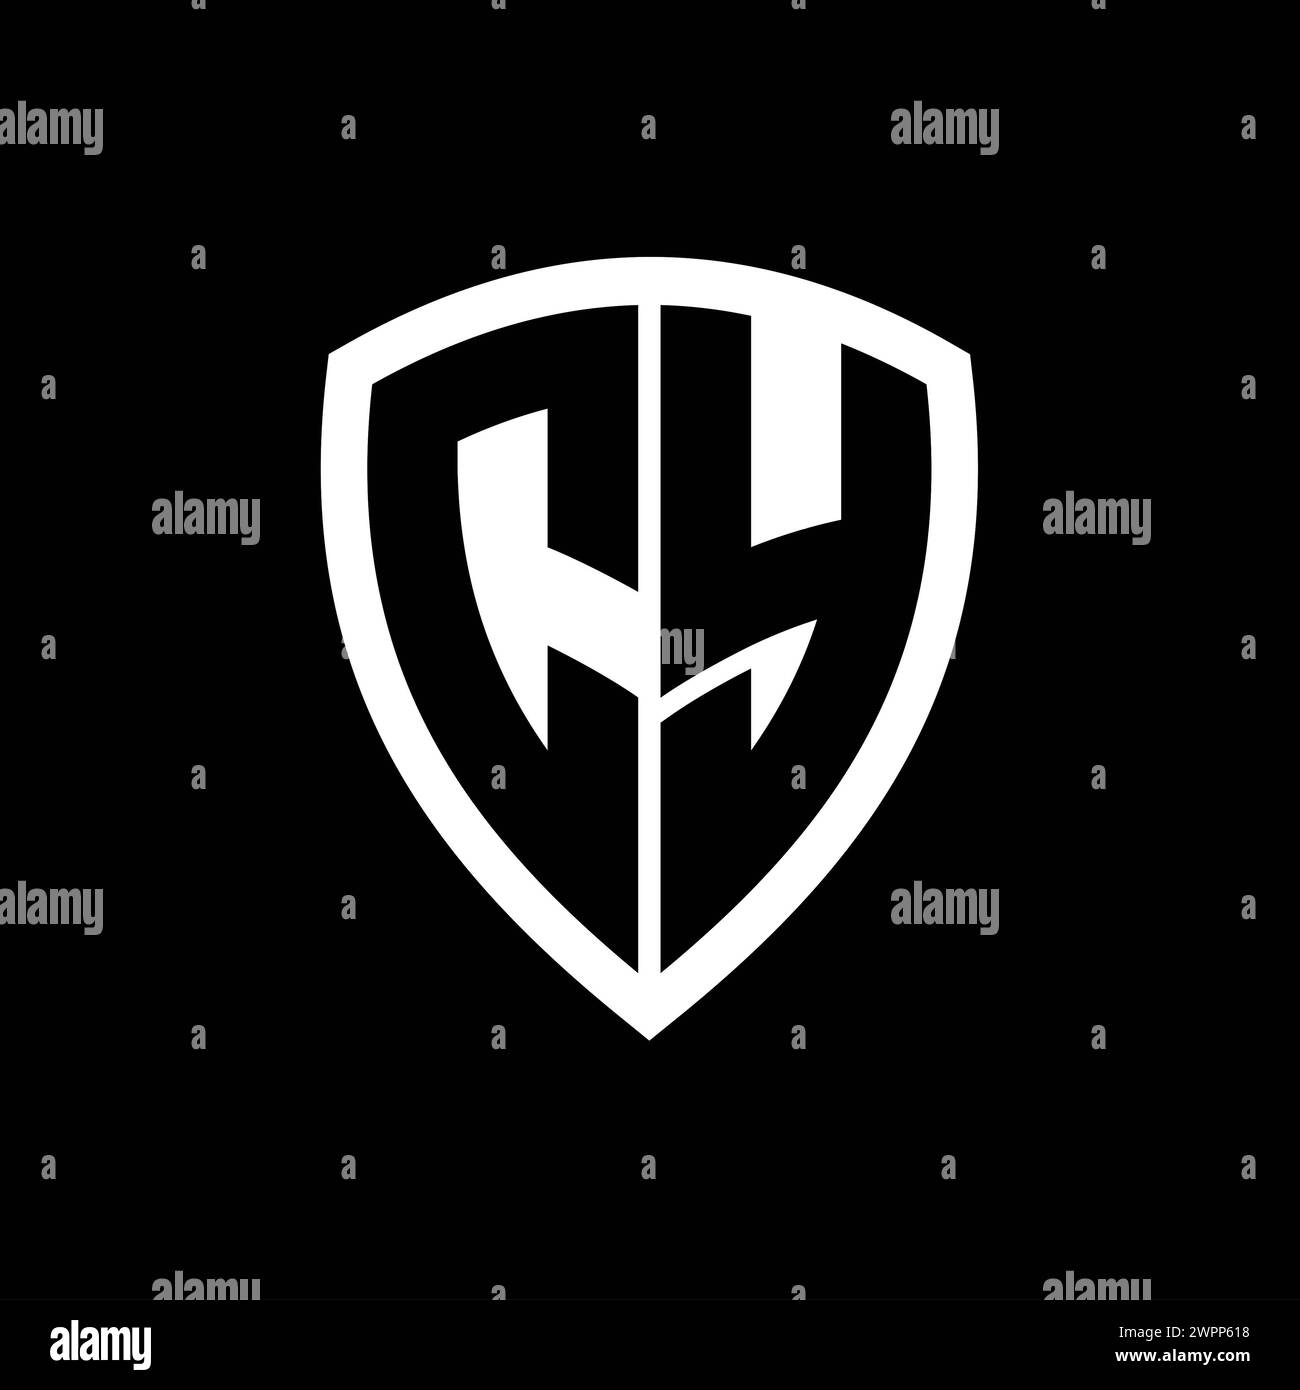 CY monogram logo with bold letters shield shape with black and white color design template Stock Photo